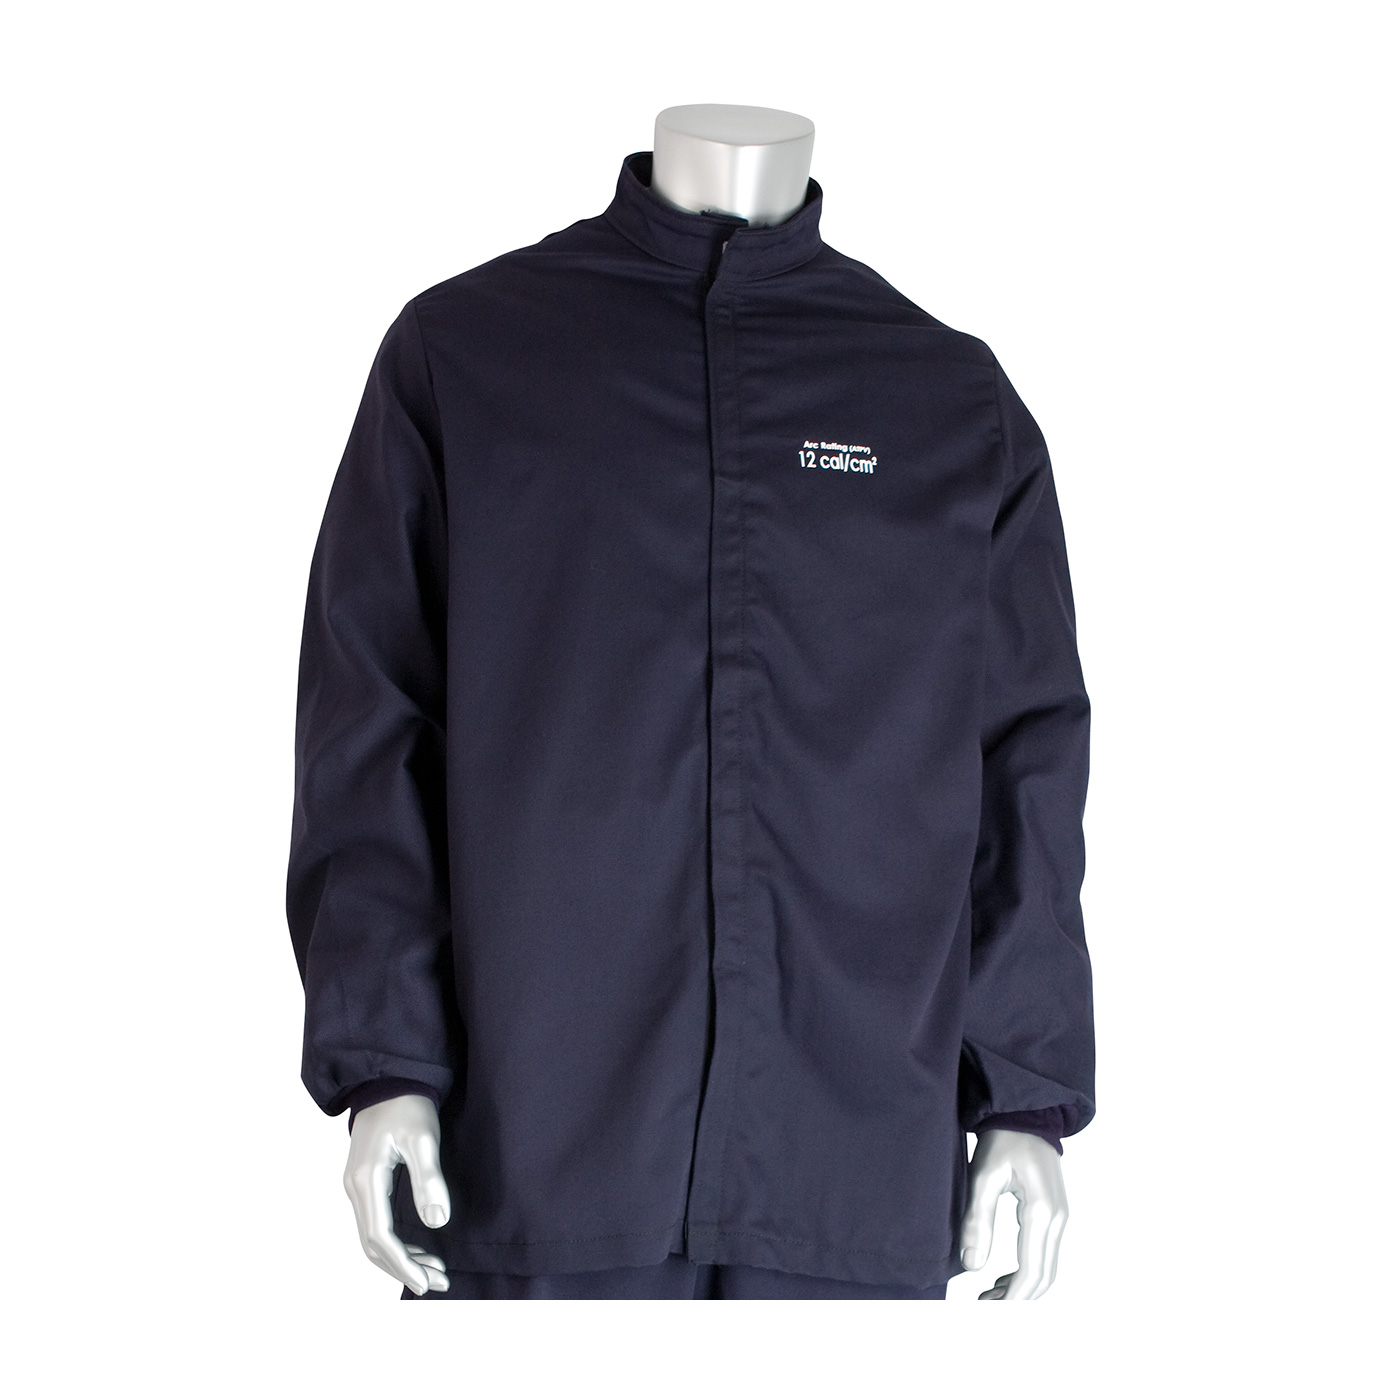 PIP® 12 cal/cm2 Navy 9oz. Arc & Fire Resistant Safety Jacket